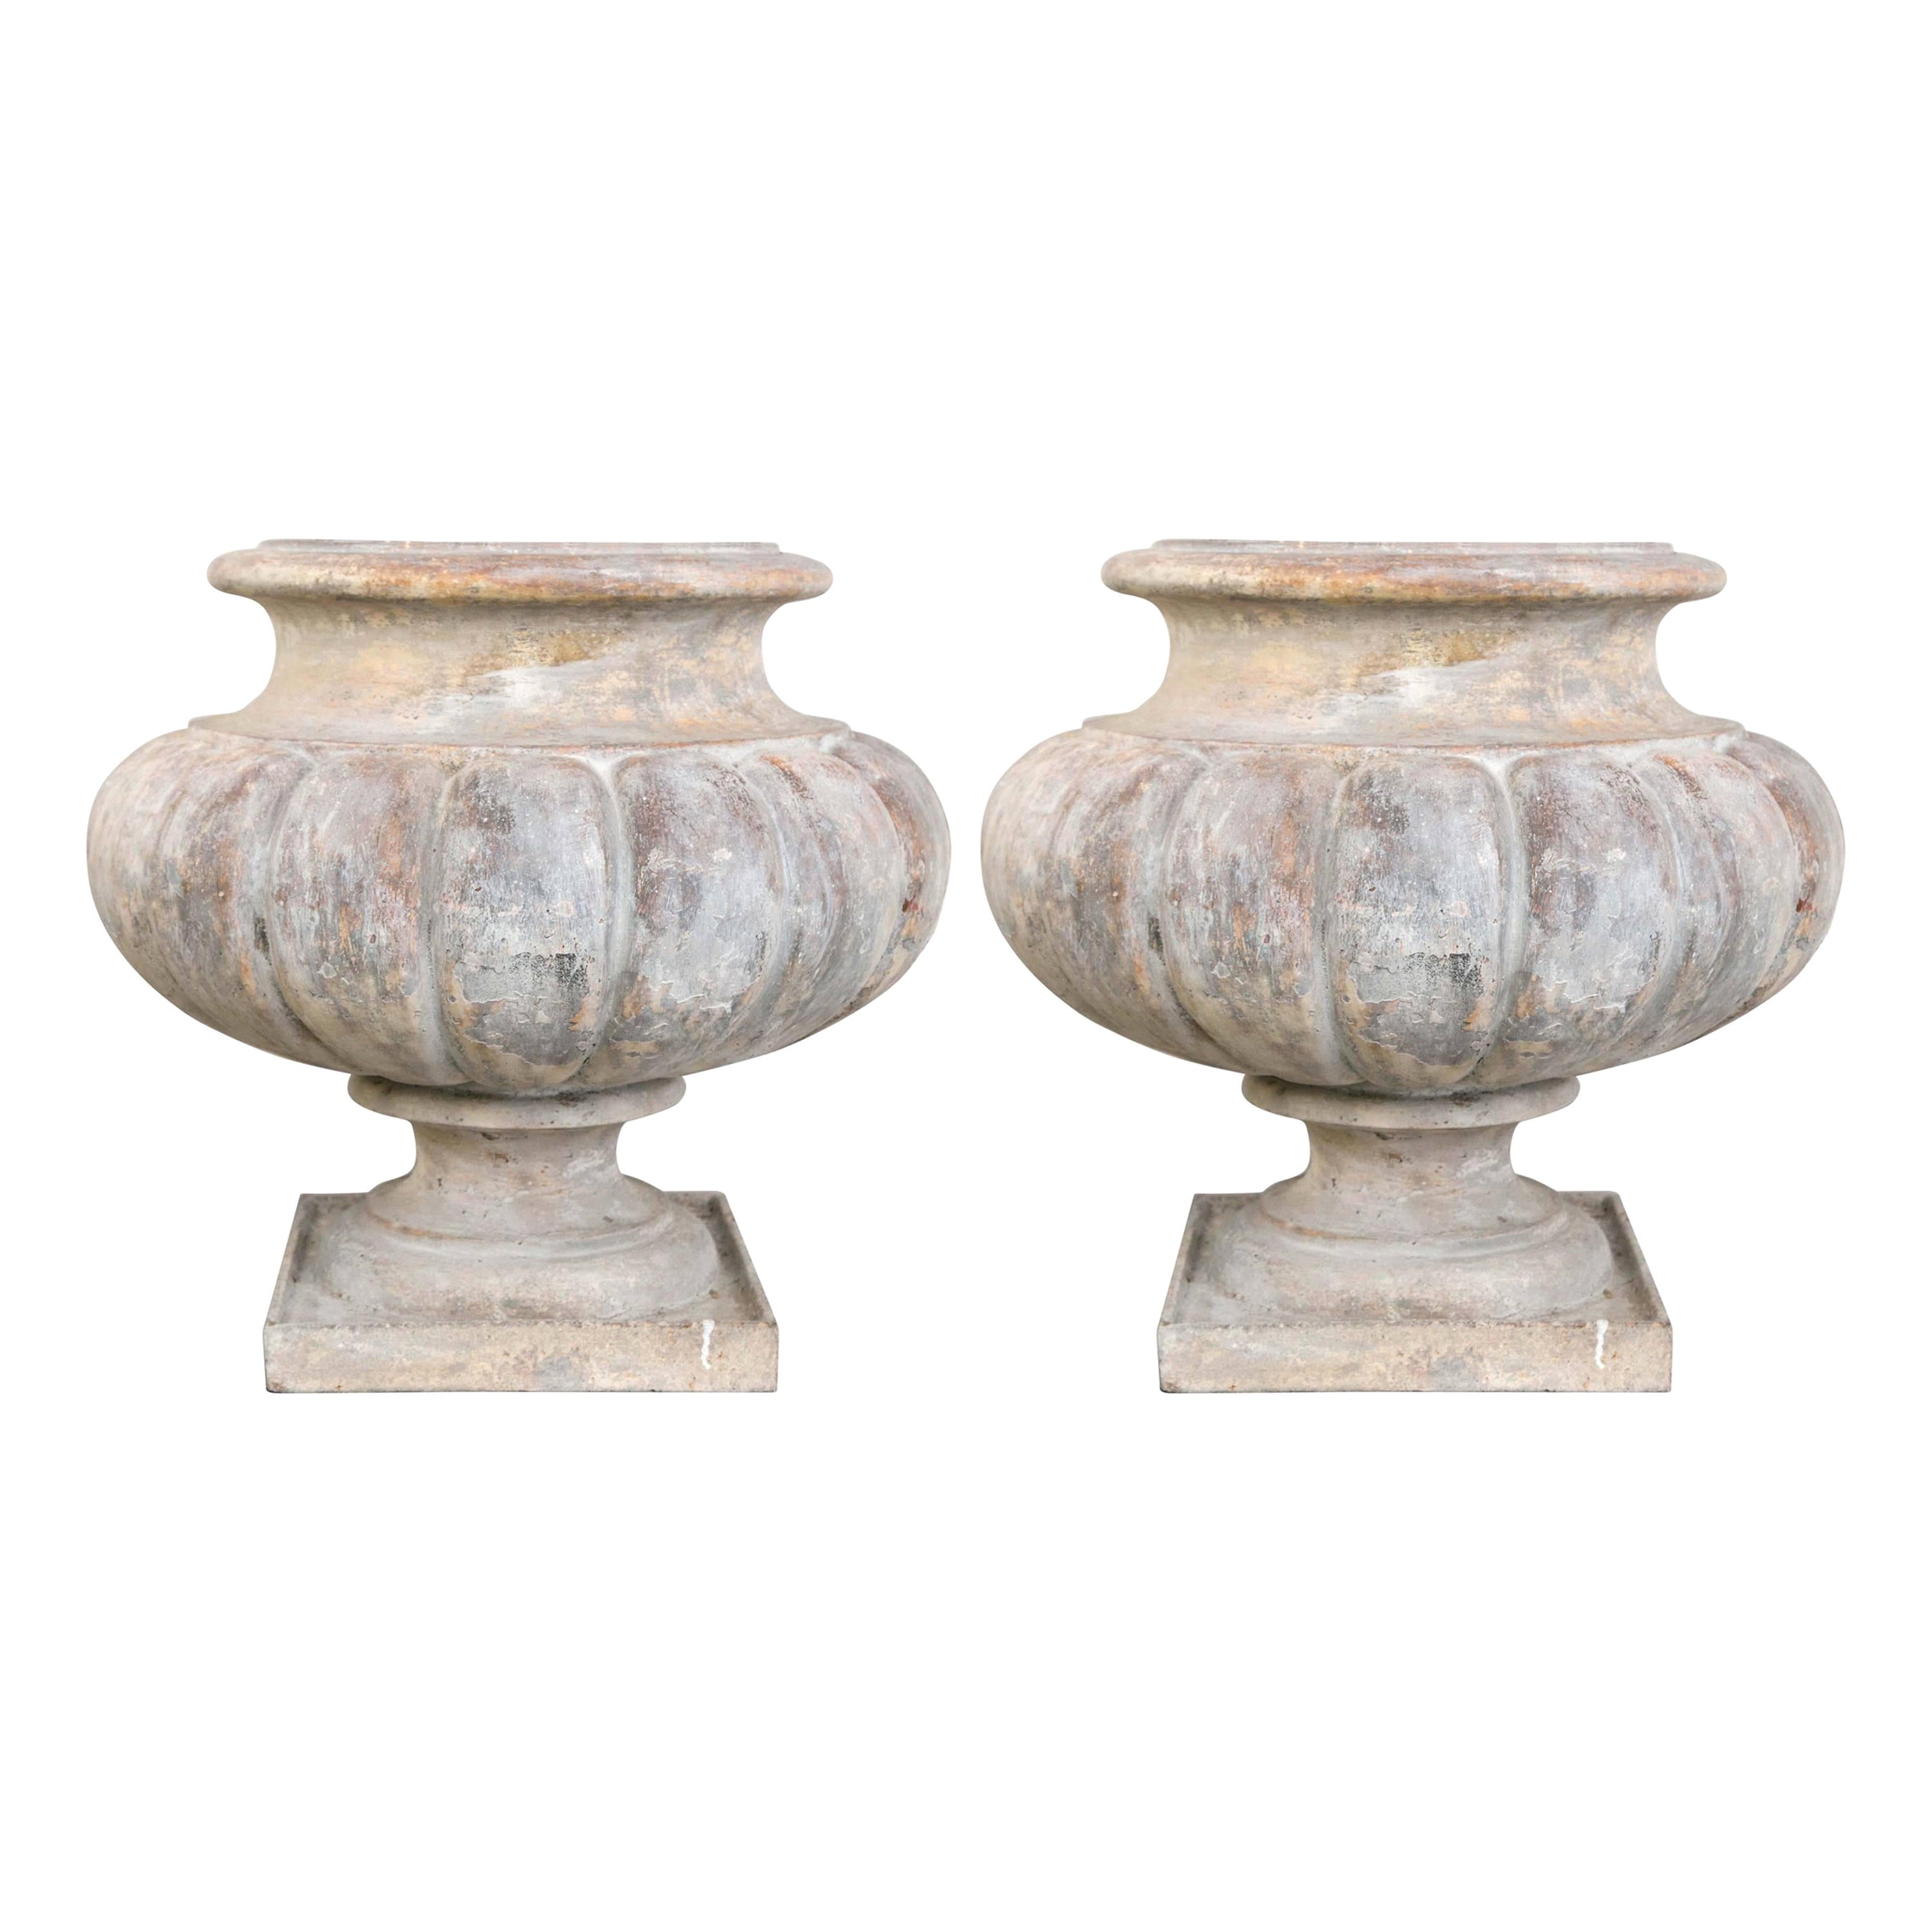 Pair of Cast Iron Melon Shaped Urns